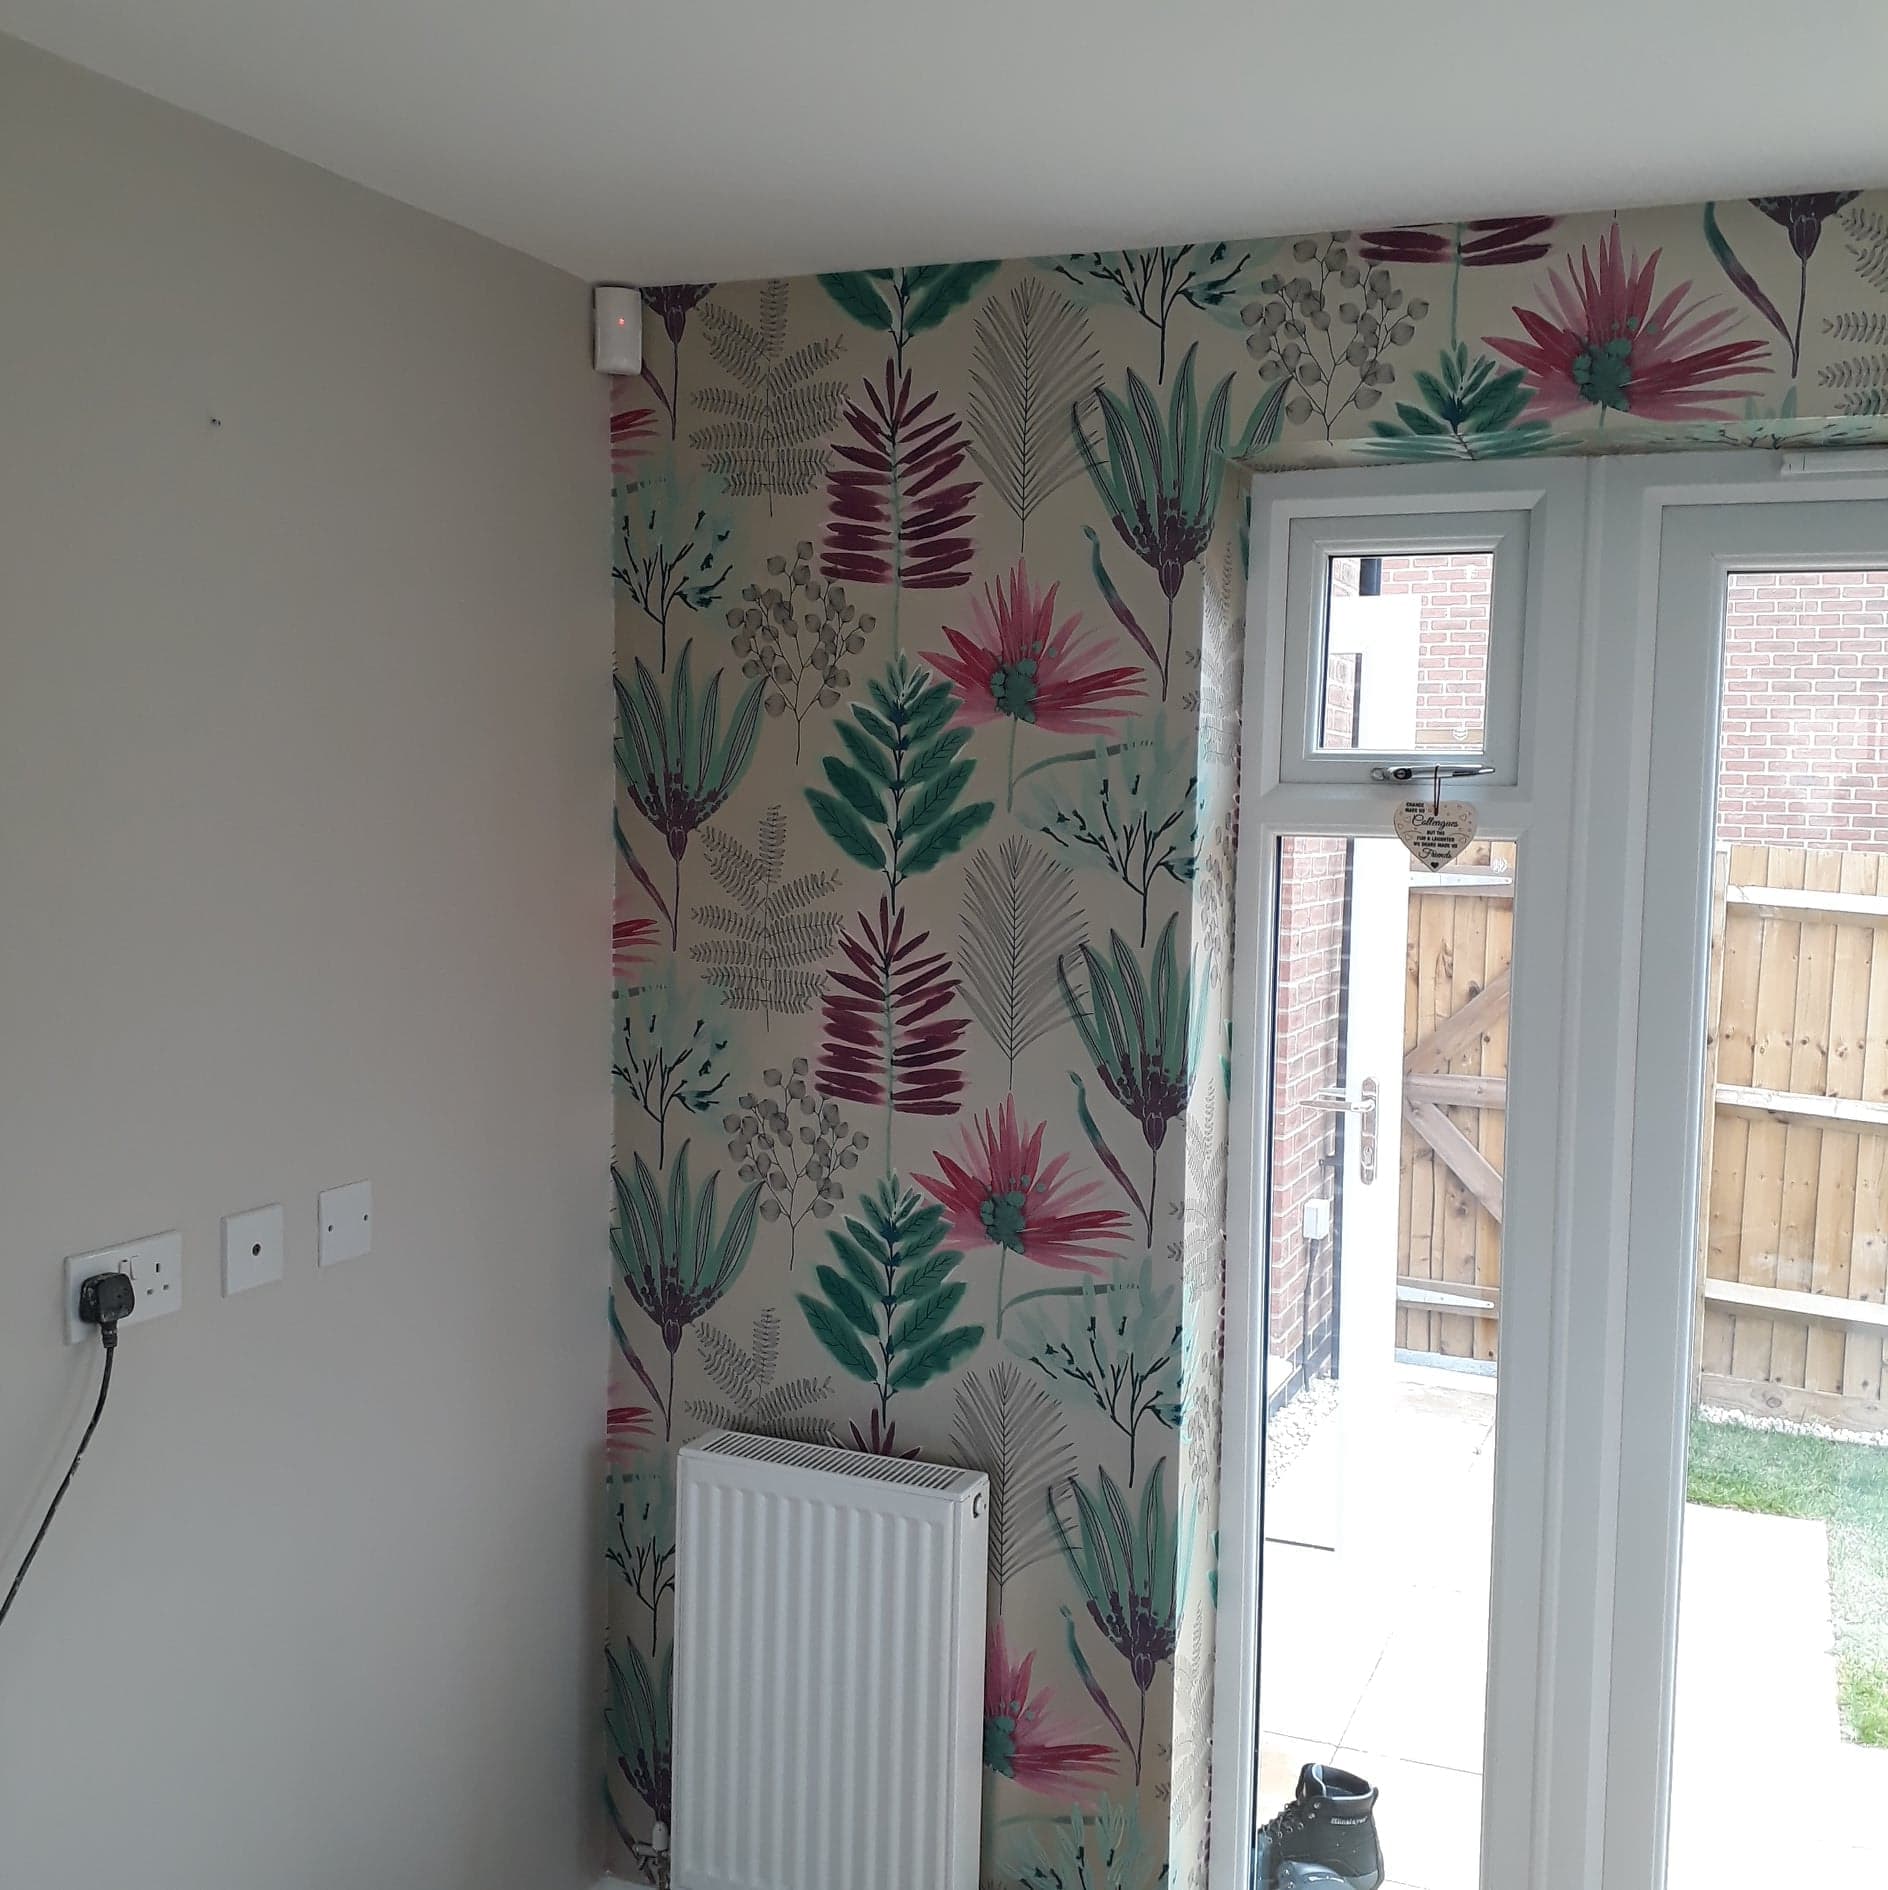 Another great decorating job from Anston Decorators Rotherham, Sheffield, Barnsley Doncaster